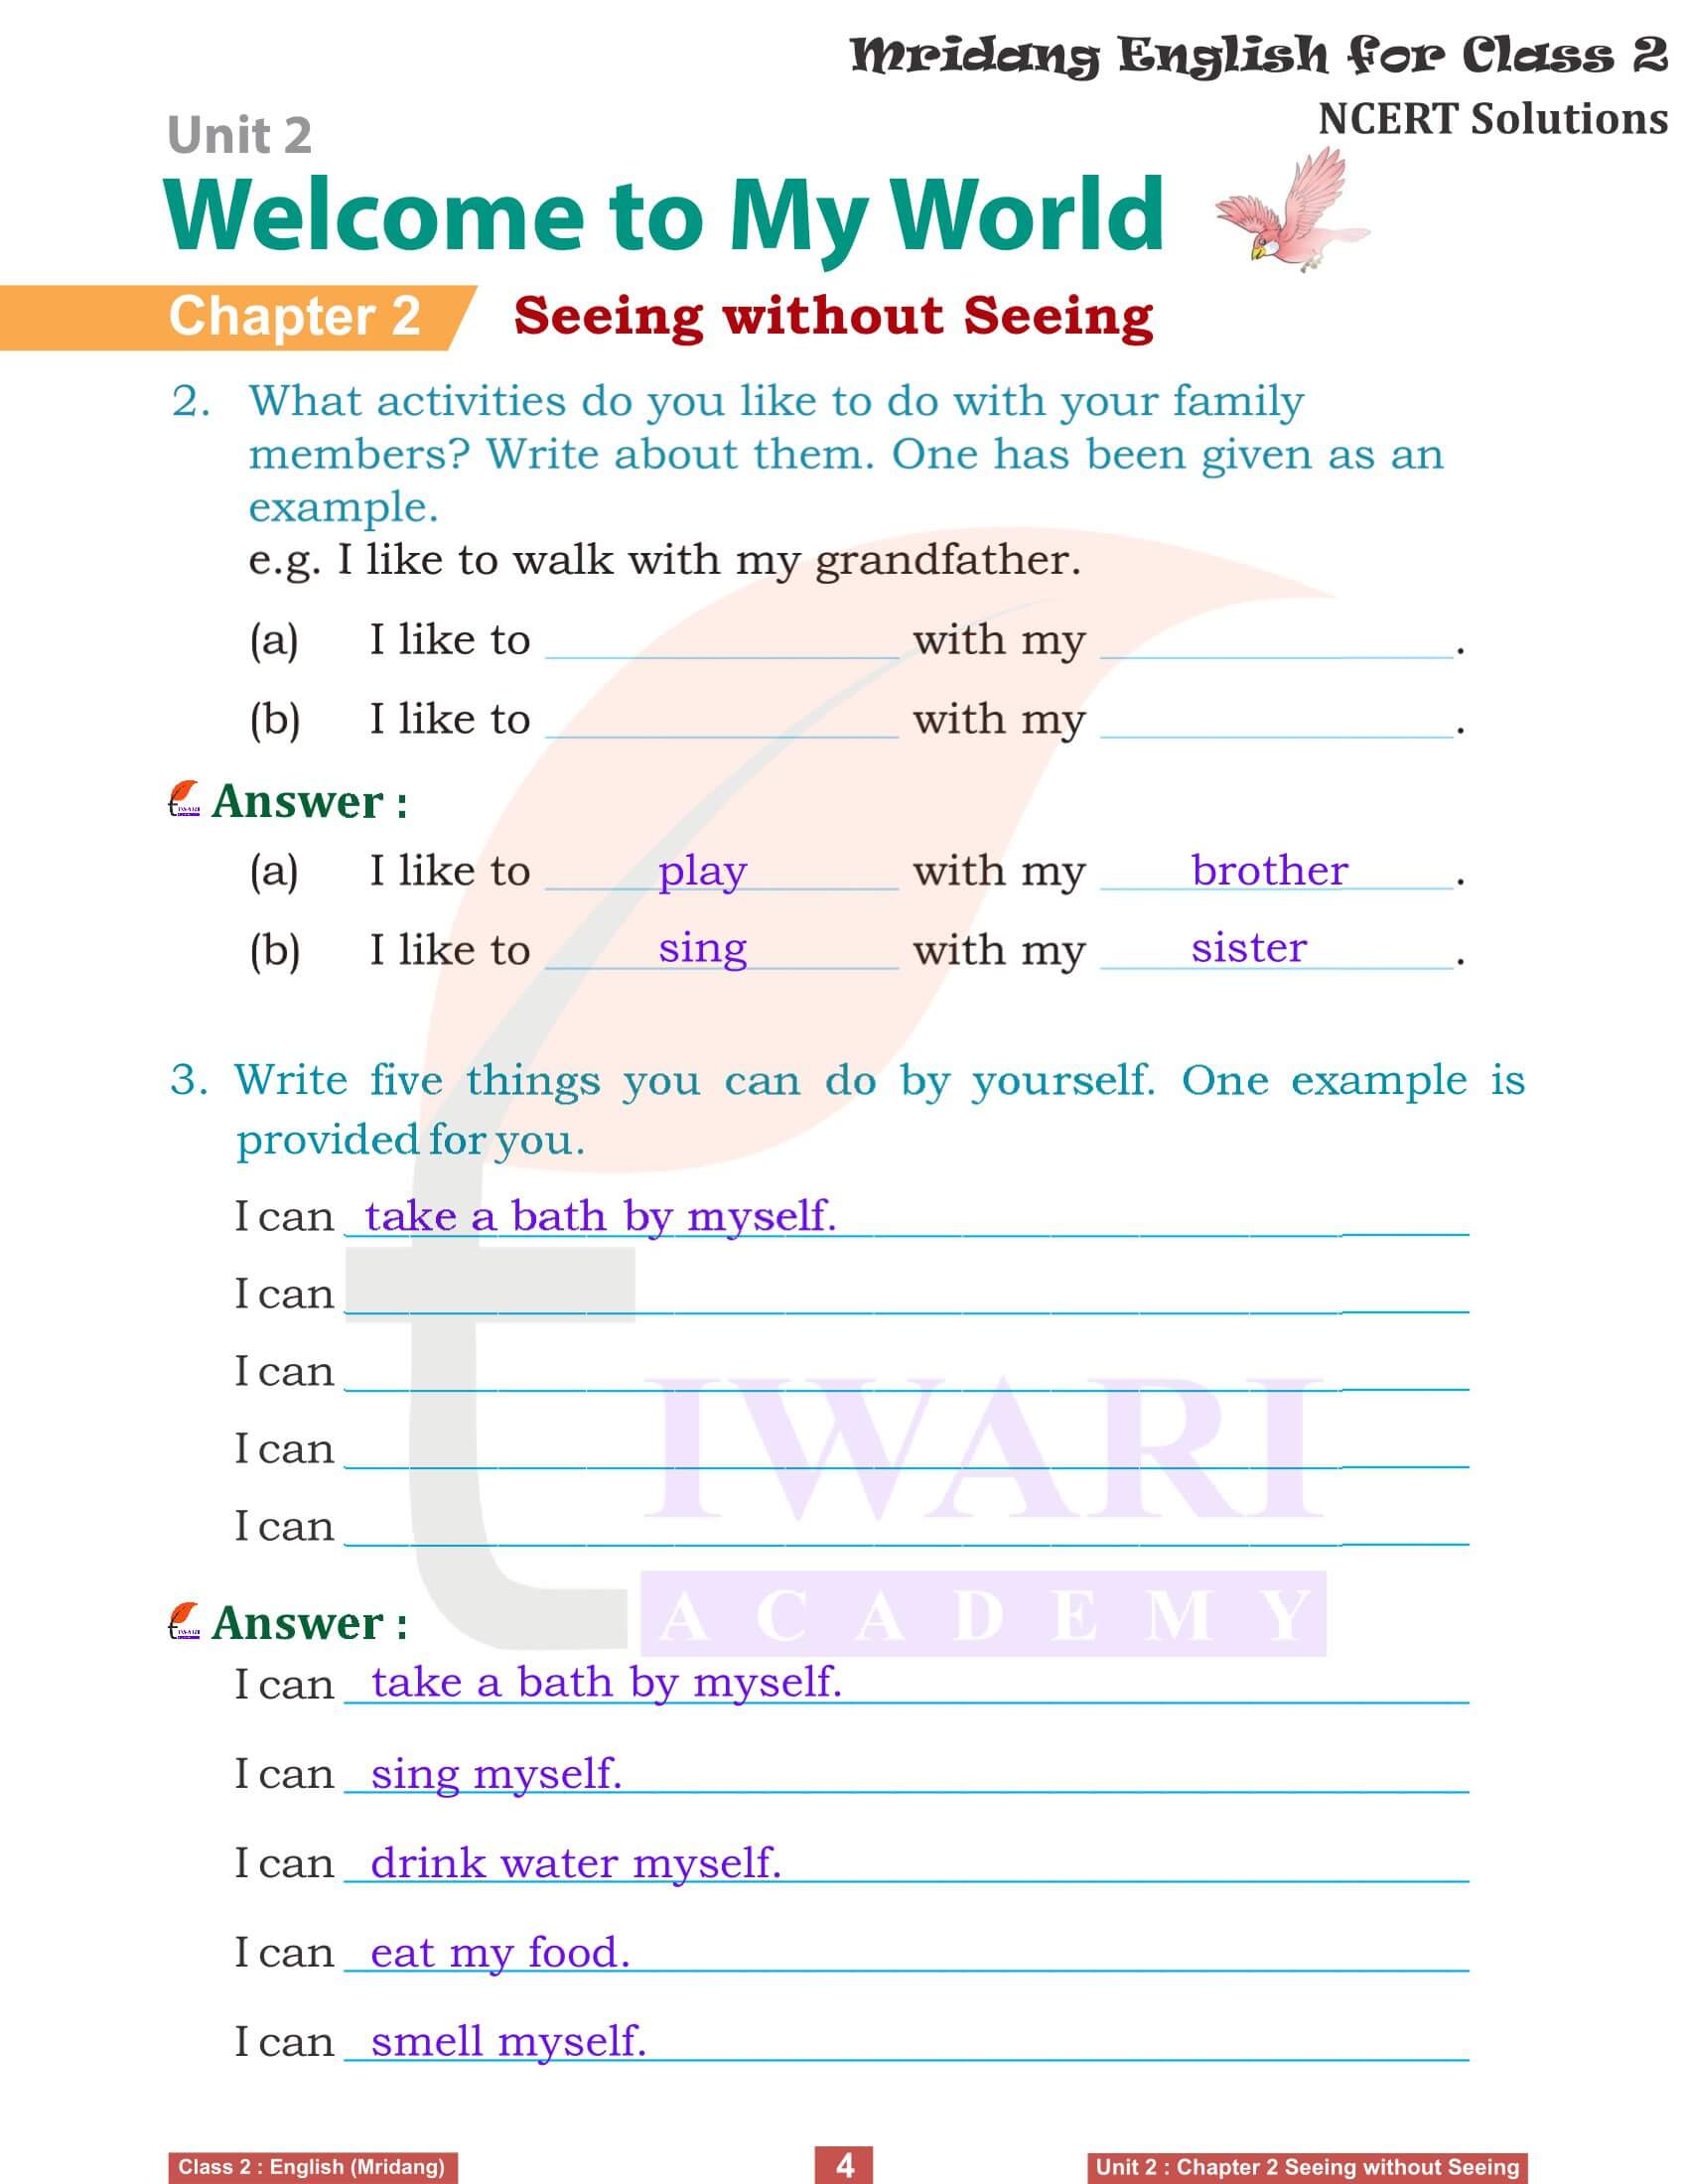 Class 2 English Mridang Unit 2 Welcome to My World Chapter 2 Seeing without Seeing